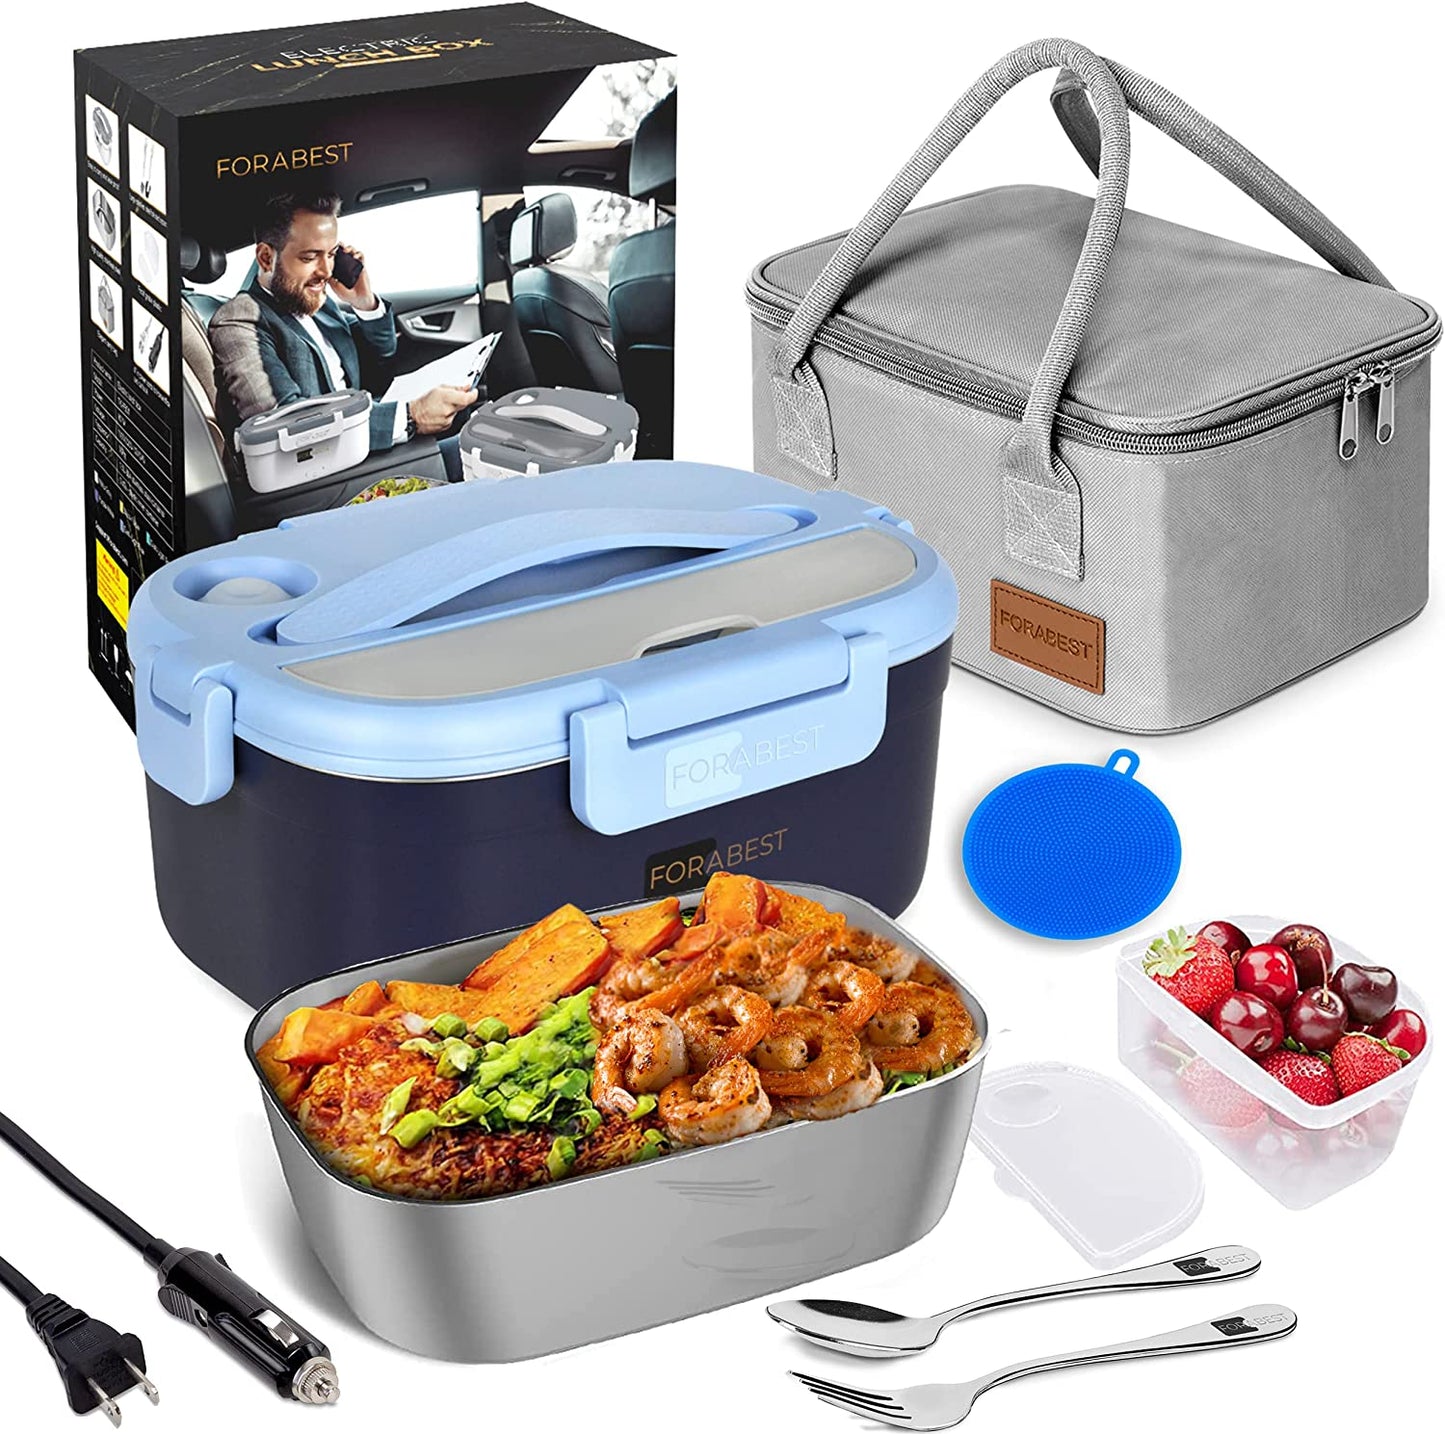 Electric Lunch Box, Self Cooking Electric Lunch Box, Heating Lunch Box,  Portable Food Warmer Lunch Box for Home and Office